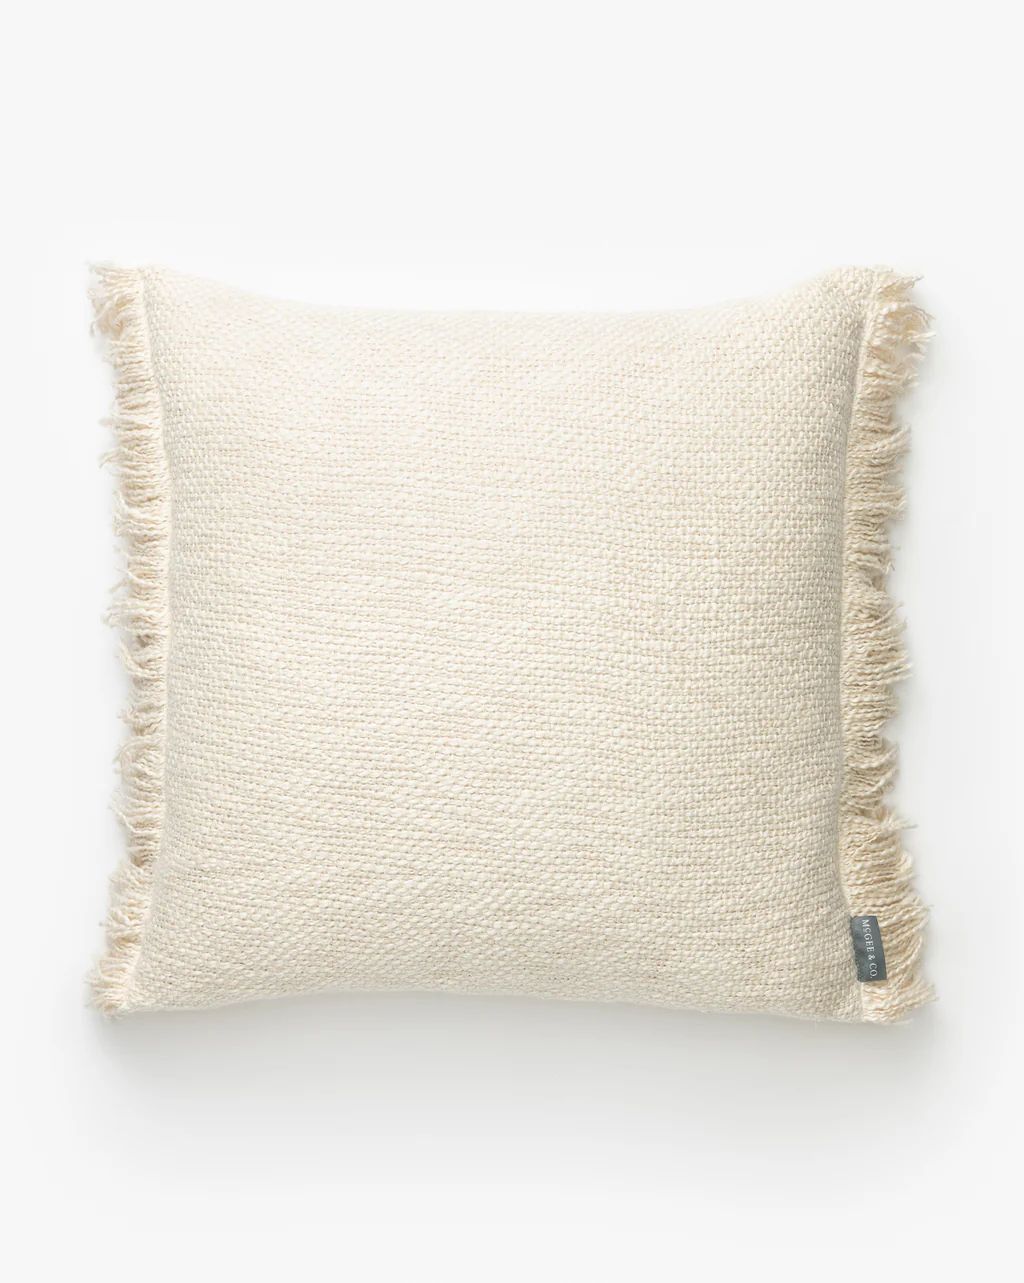 Aisling Pillow Cover | McGee & Co.